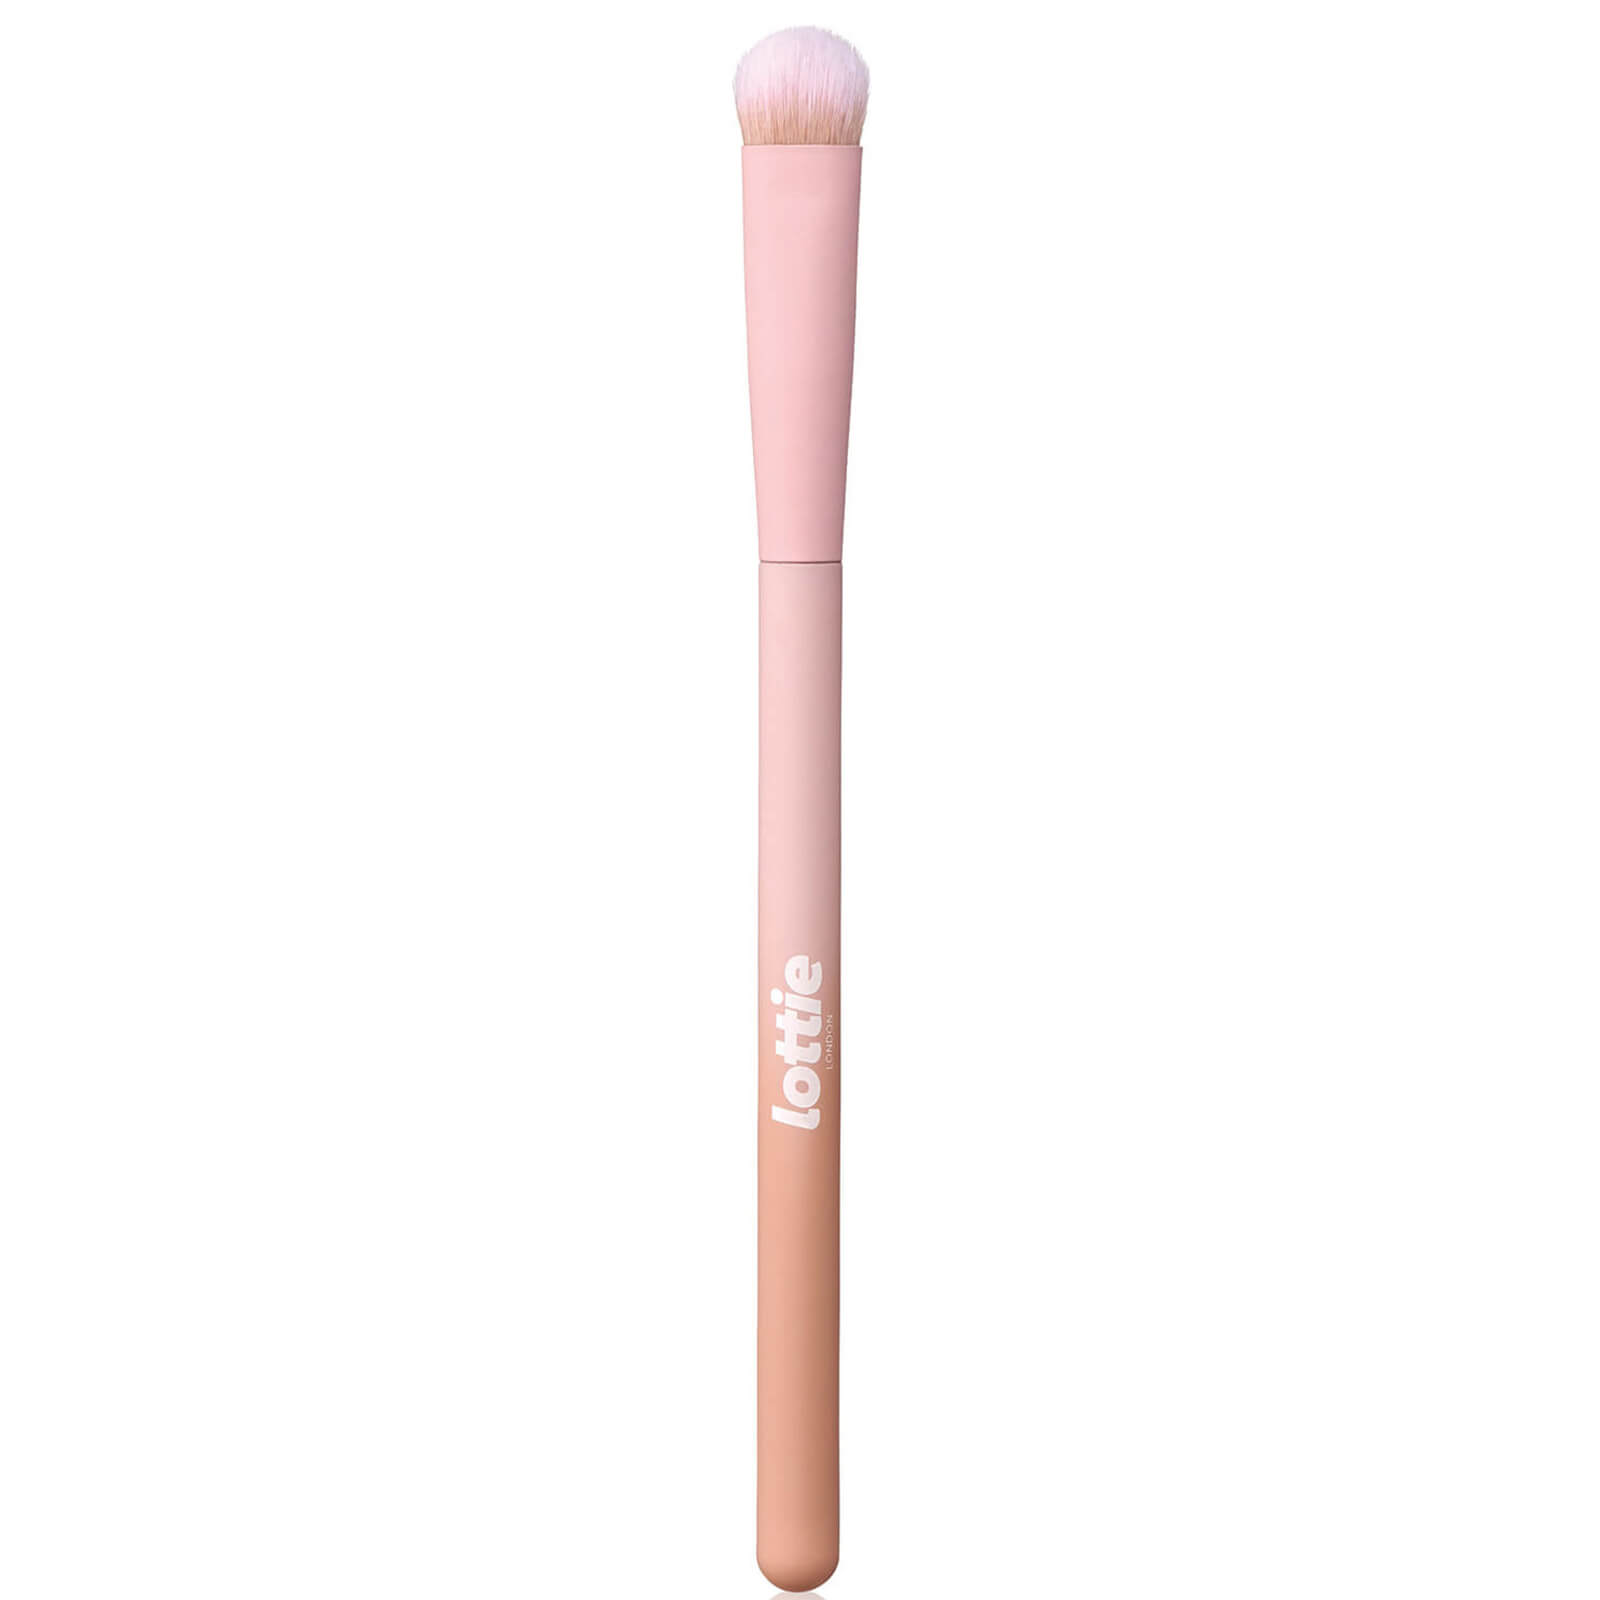 Image of Lottie London LE015 Firm Shadow Brush